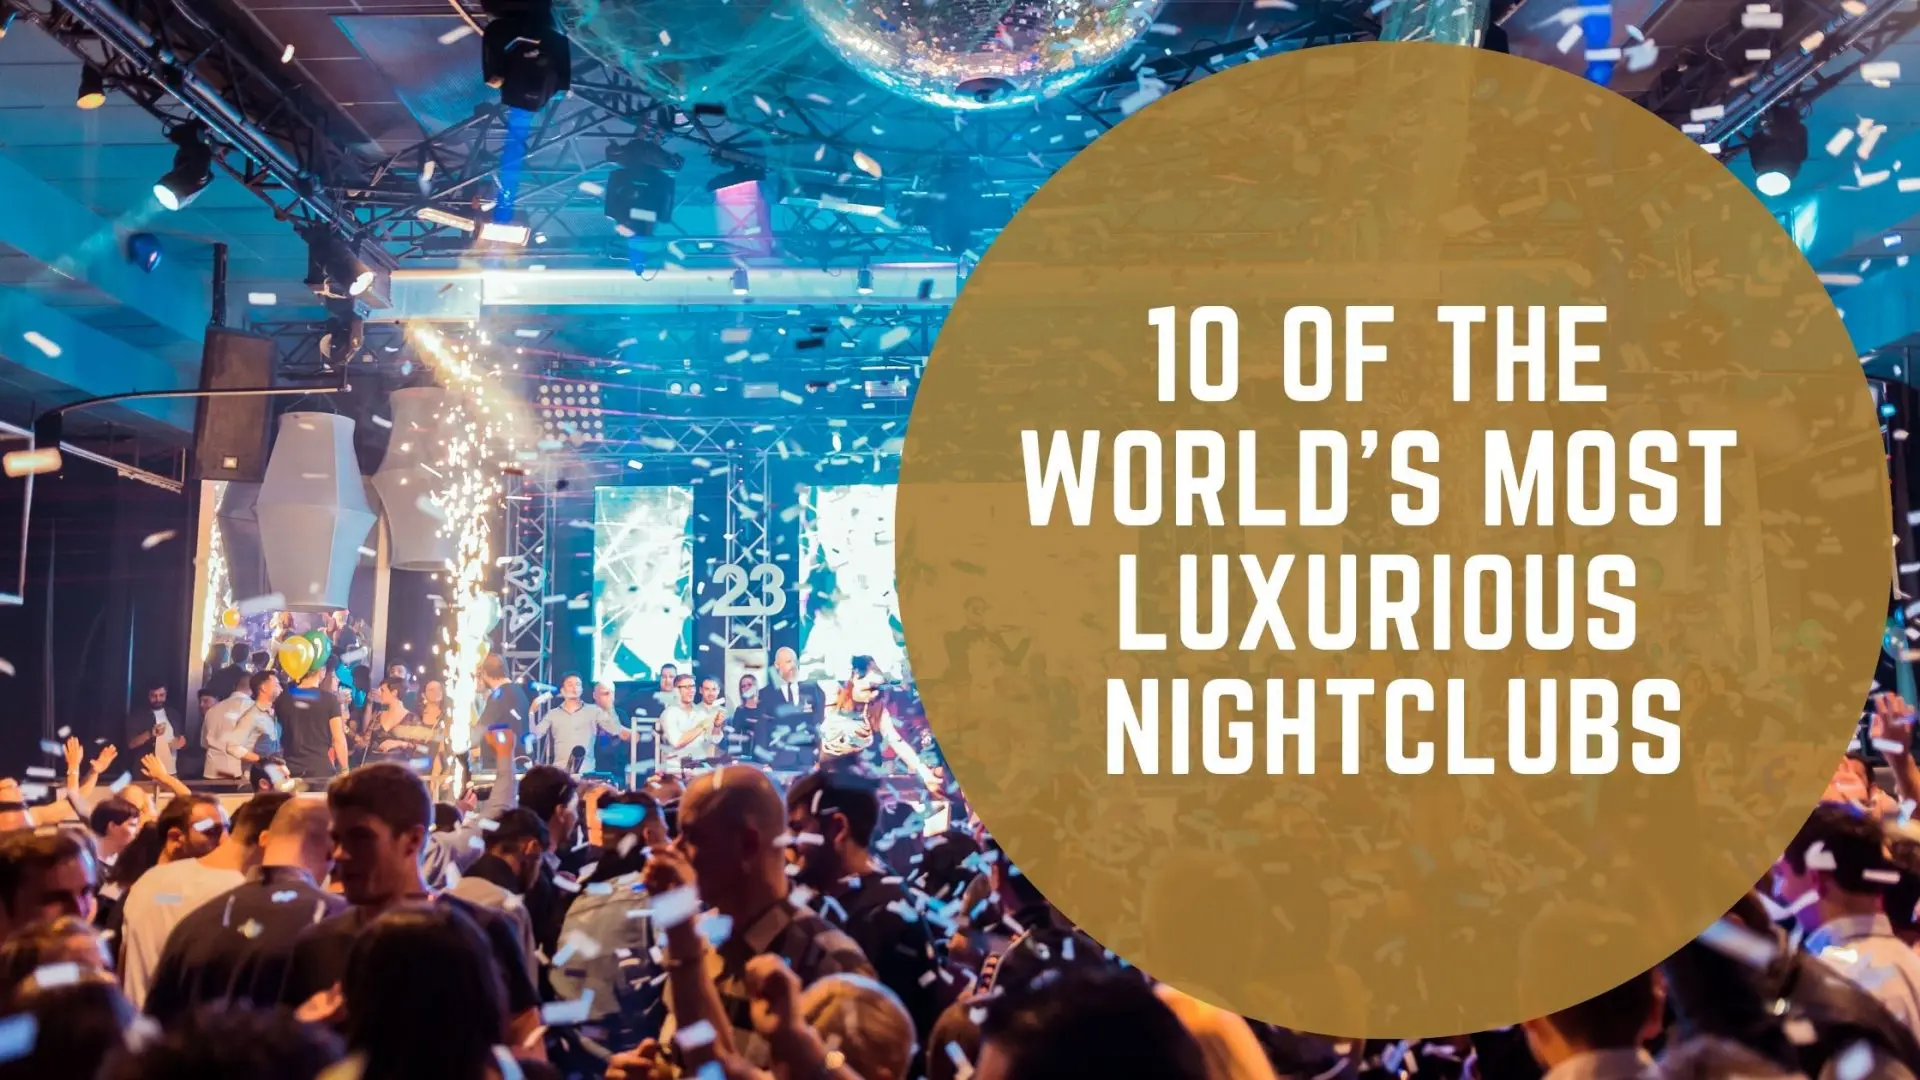 10 Of The World's Most Luxurious Nightclubs